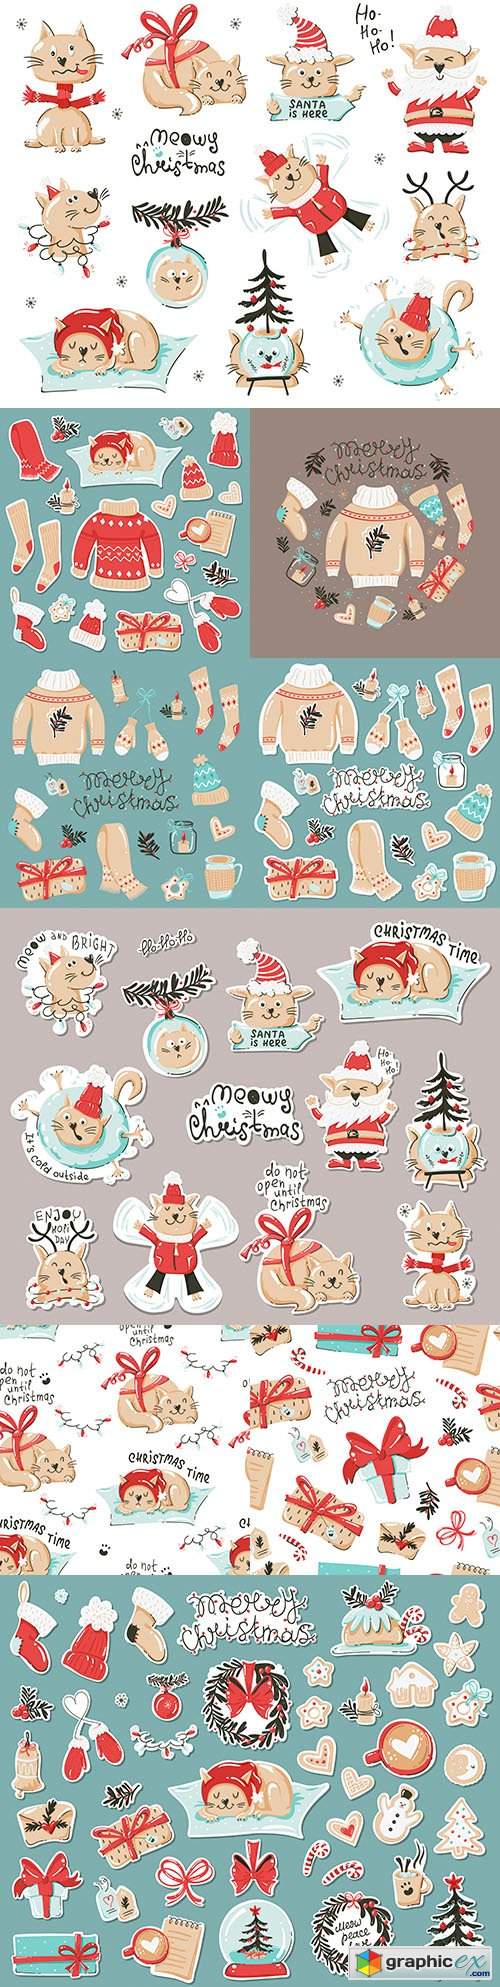  Fun animal label set with Christmas elements design 